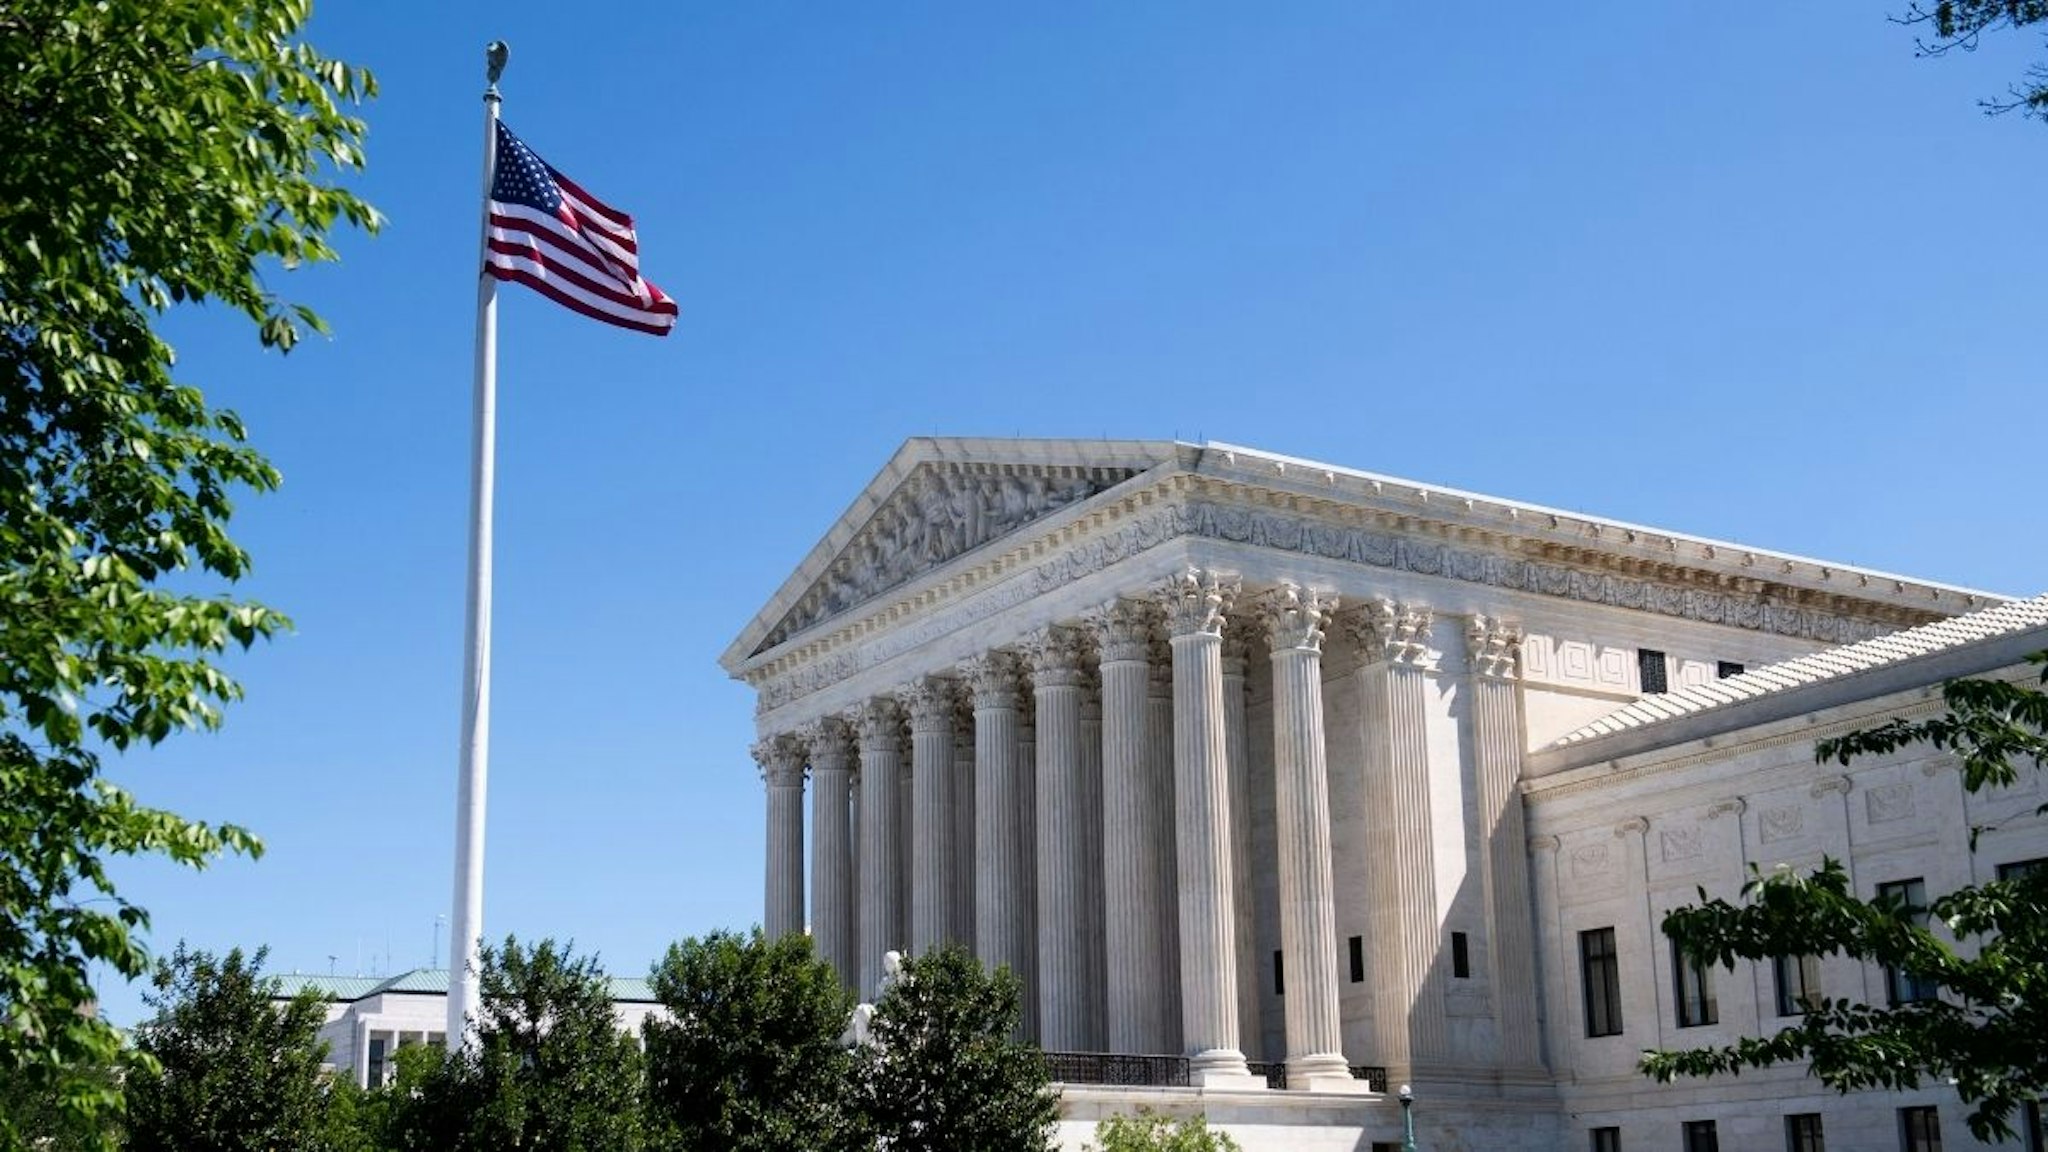 The US Supreme Court is seen in Washington, DC, on May 4, 2020, during the first day of oral arguments held by telephone, a first in the Court's history, as a result of COVID-19, known as coronavirus.